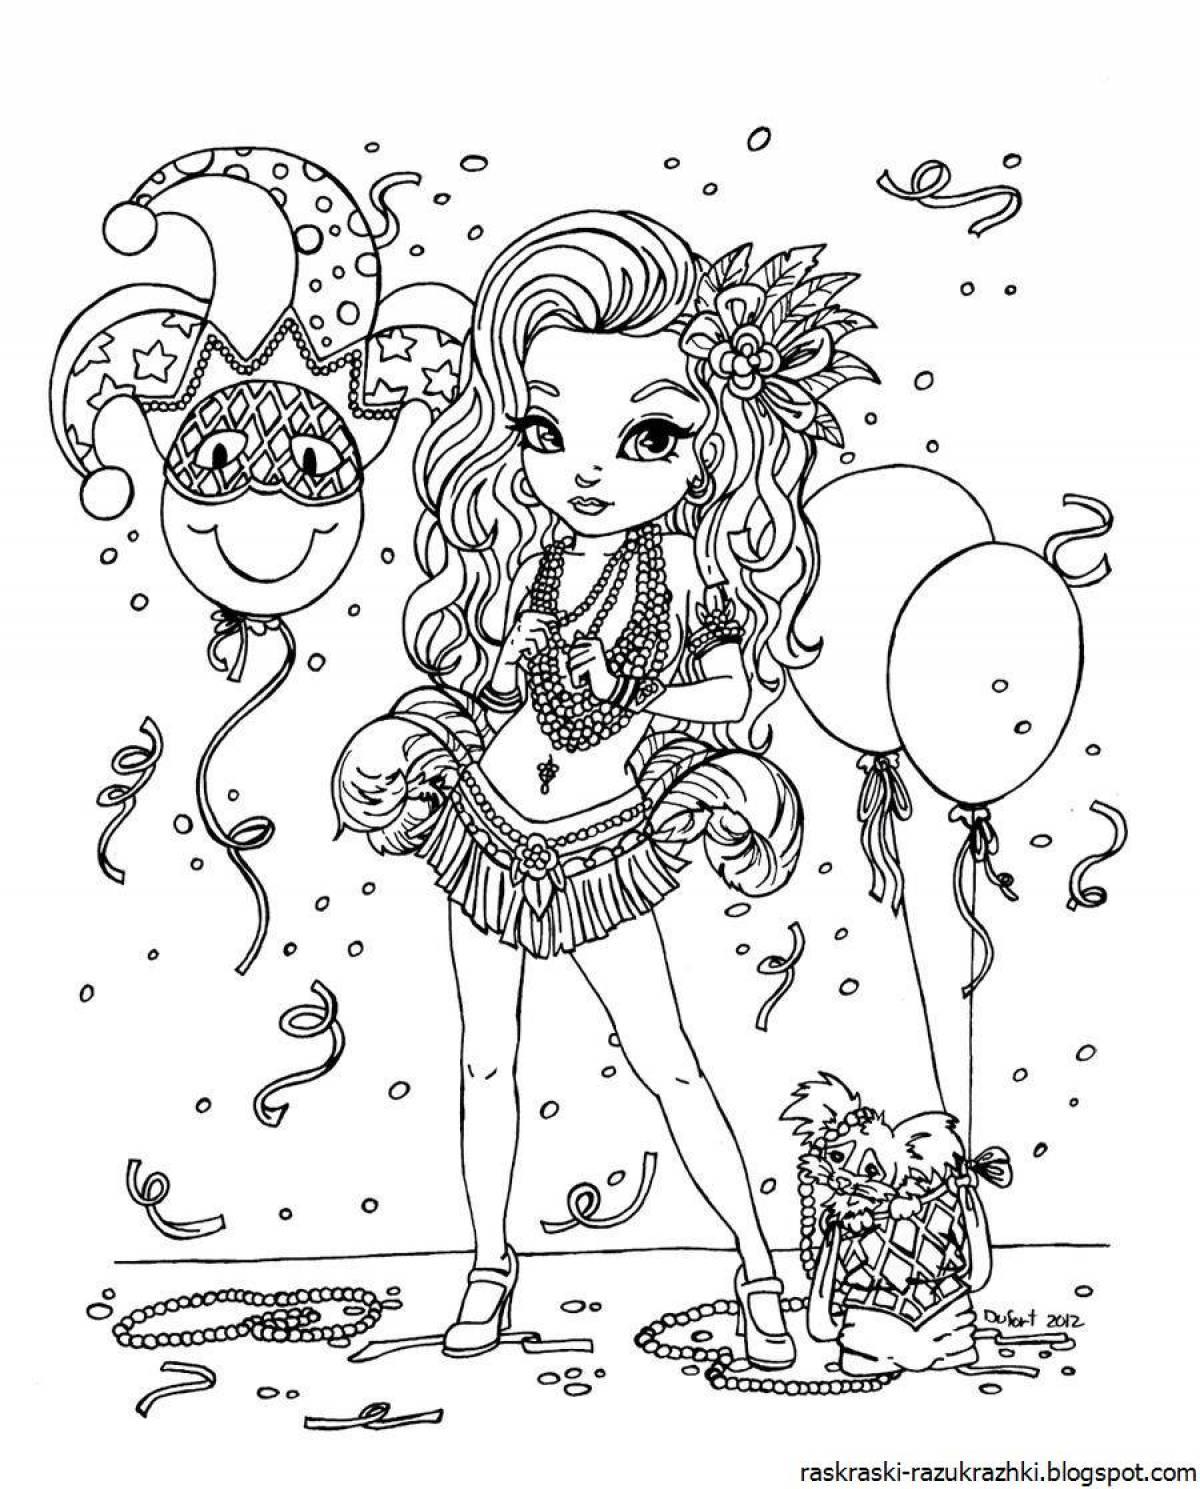 Color-frenzy coloring page for 13 year old girls